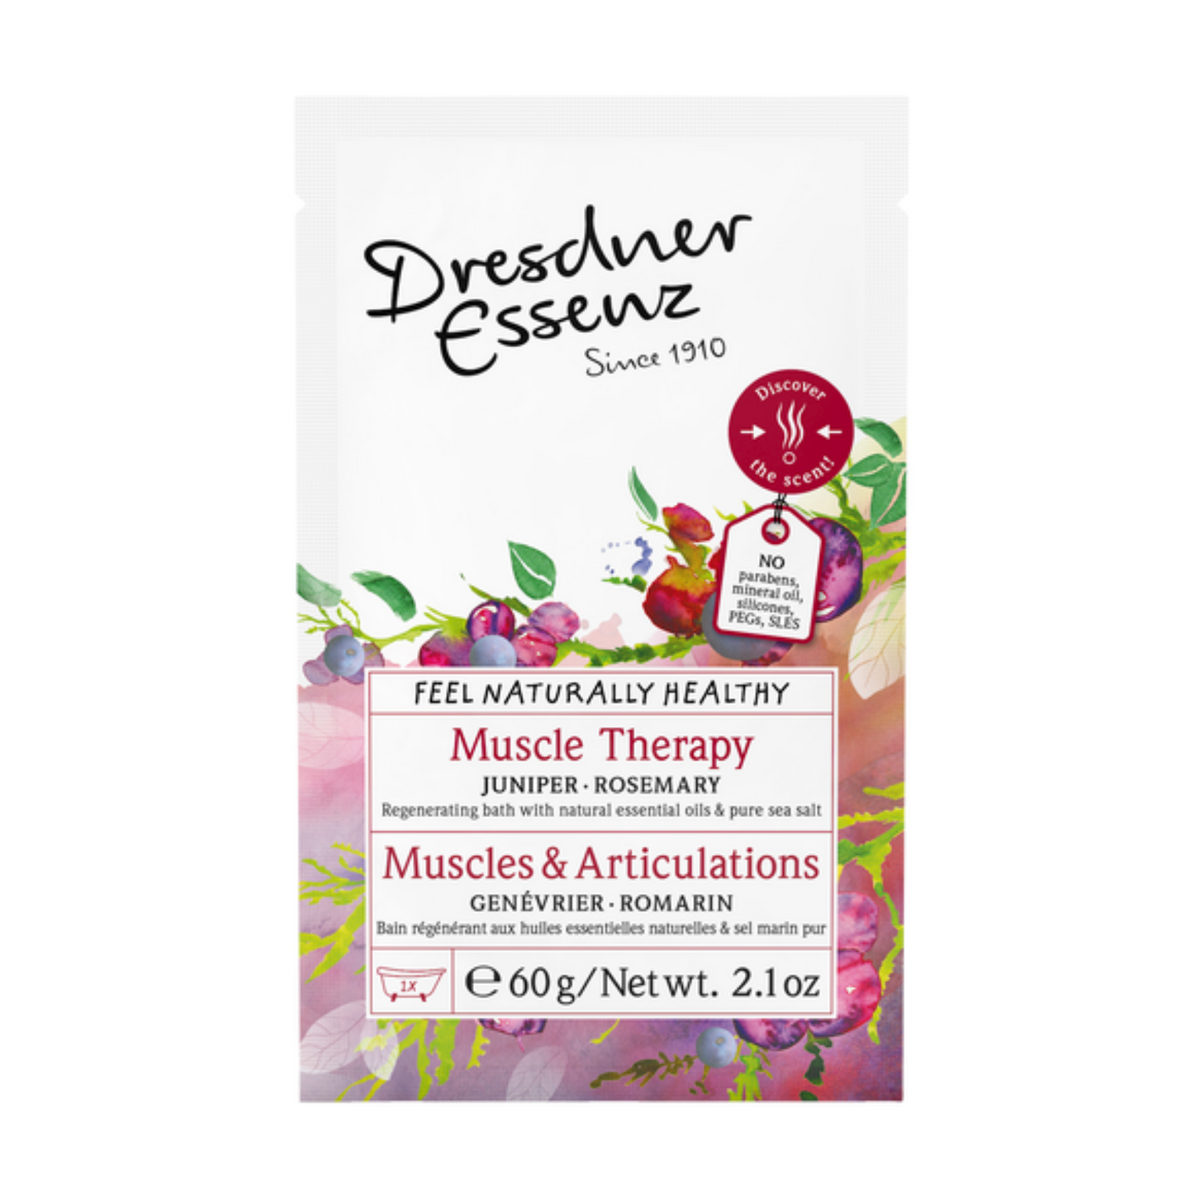 Dresdner Essenz Muscle Therapy Bath Packet (2.1 oz) #10072192